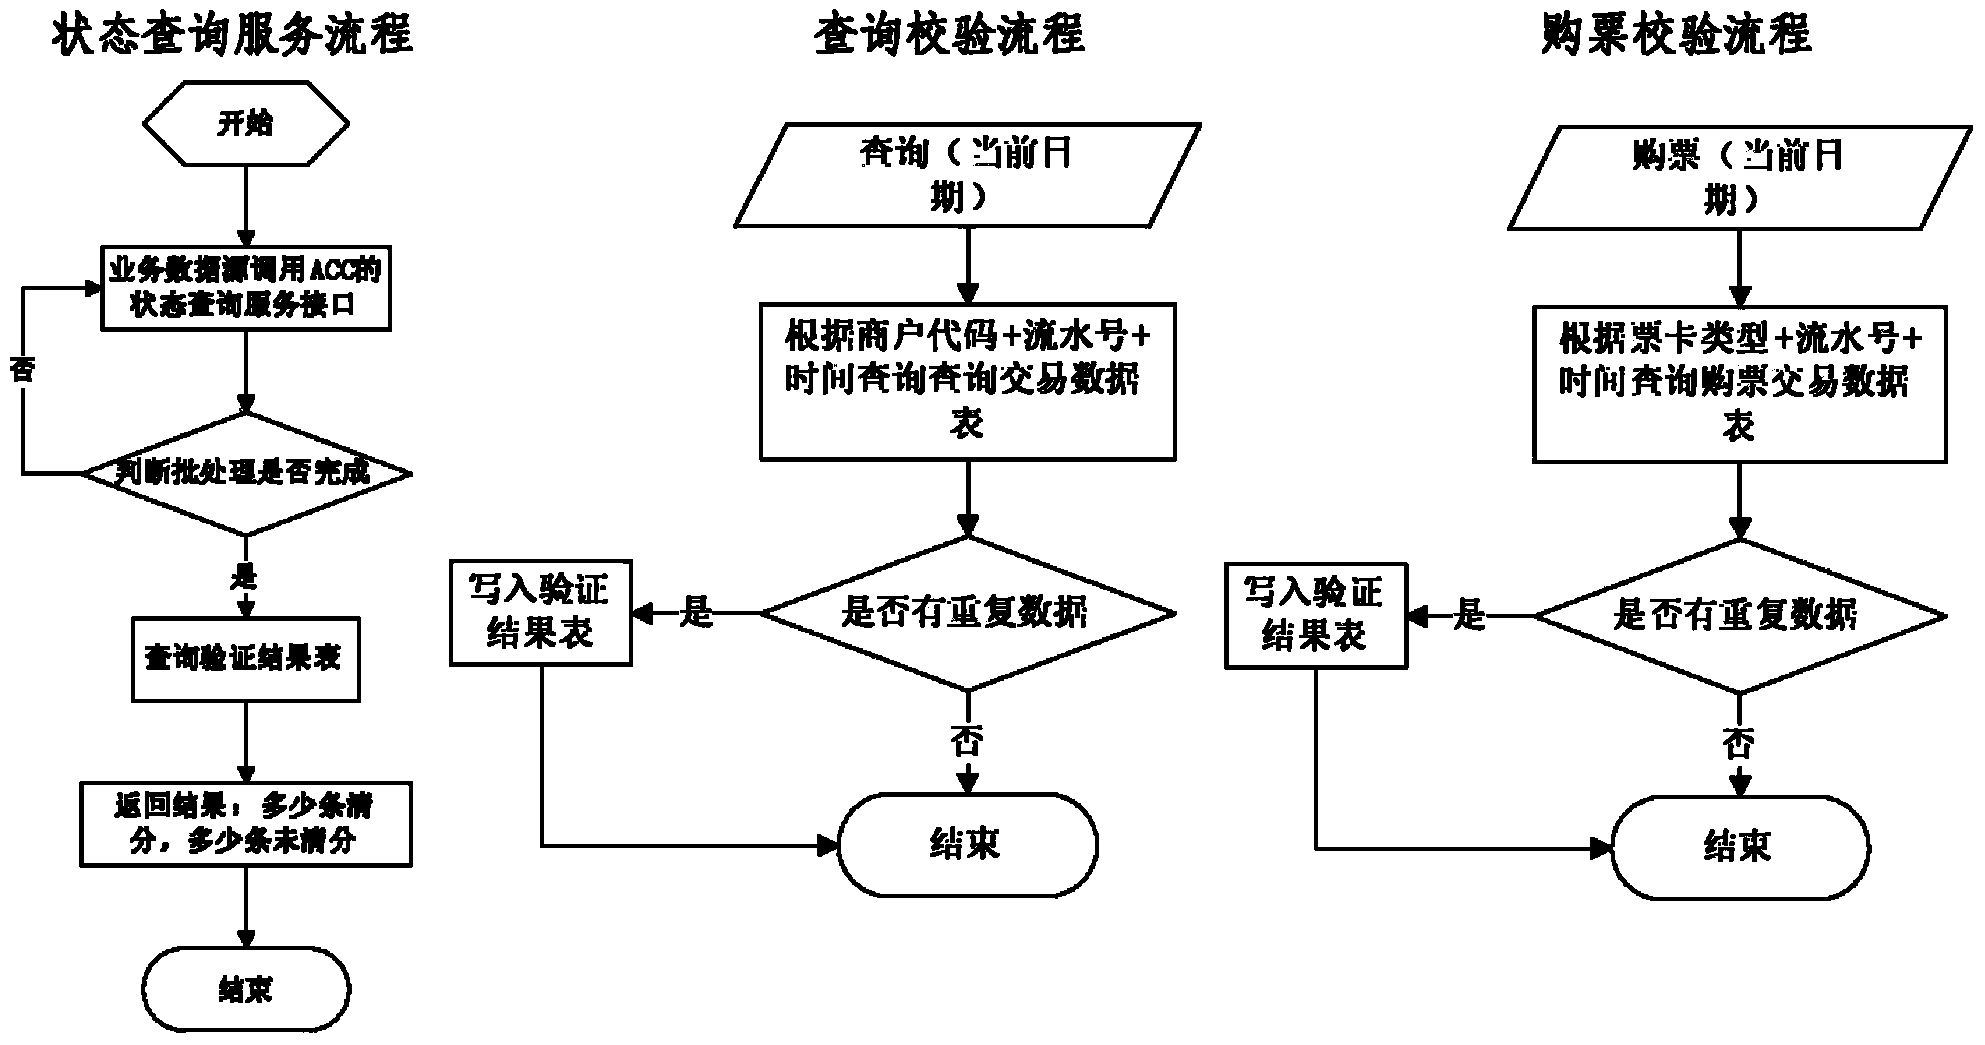 Ticket clearing system and method